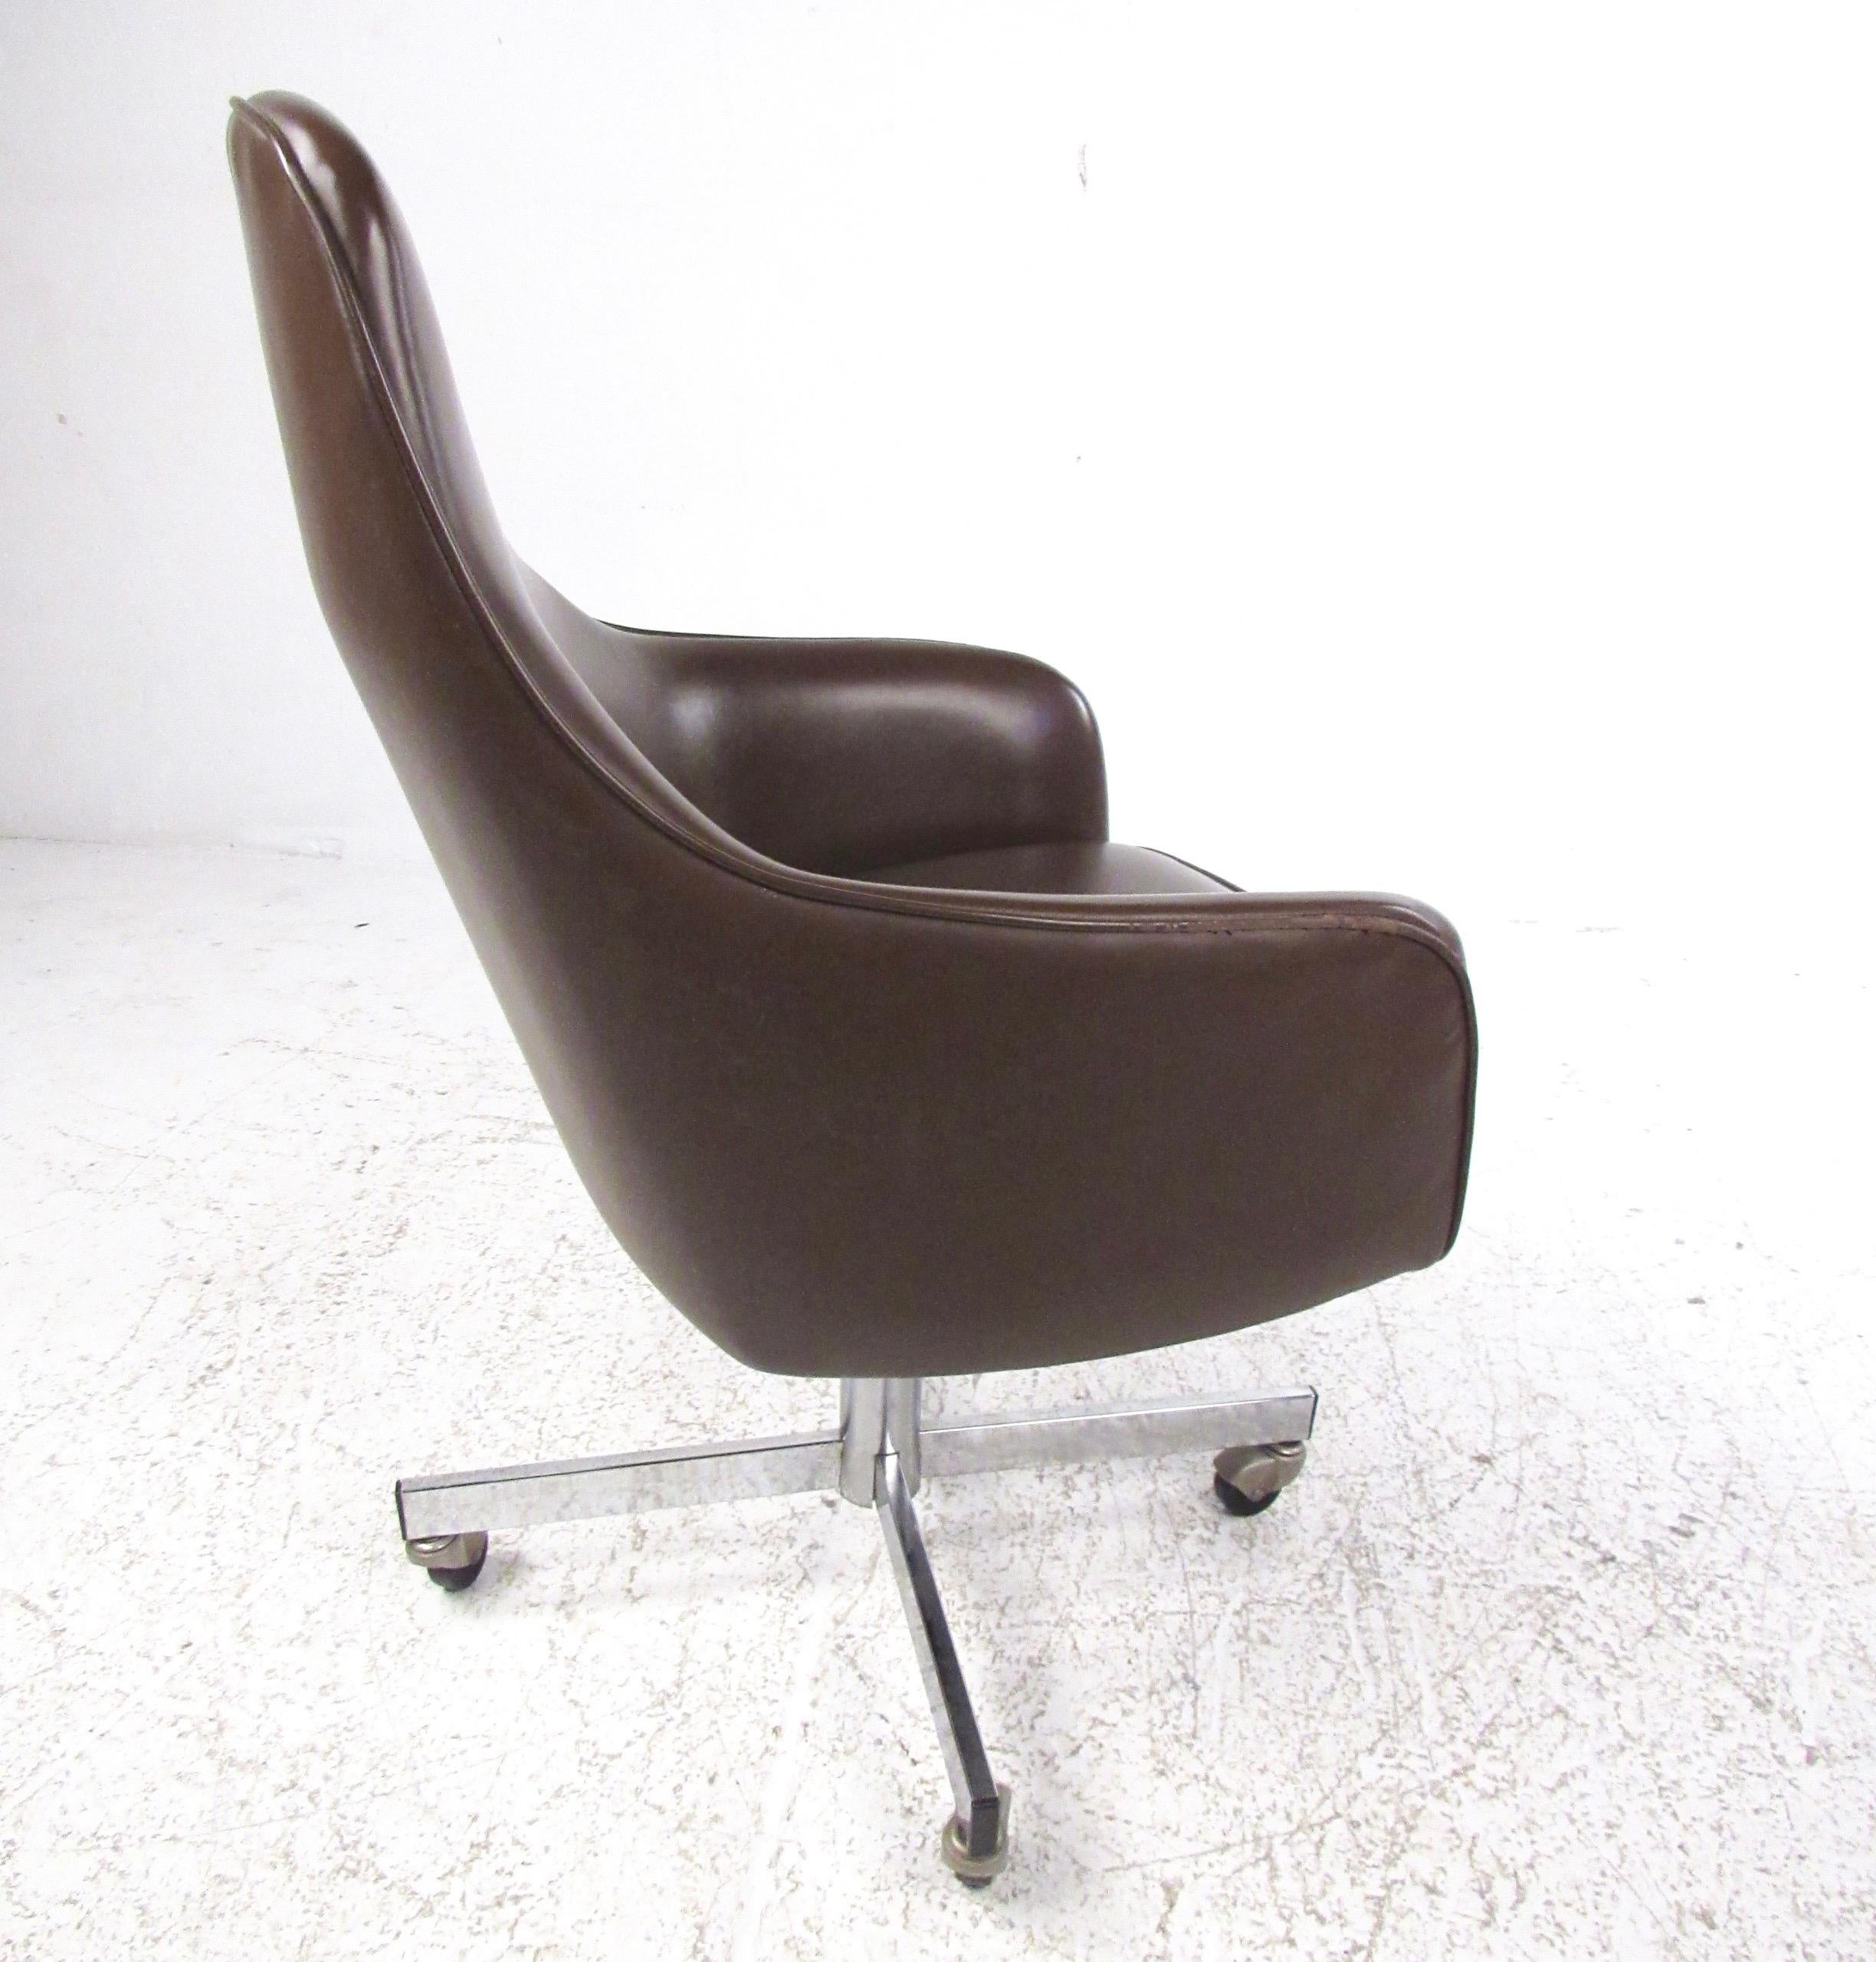 This high back desk chair features shapely vinyl swivel seat and sturdy metal base. Stylish Mid-Century Modern design adds retro appeal to home or business office. Fixed seat height of 18 inches, seat tilts for comfort. Please confirm item location